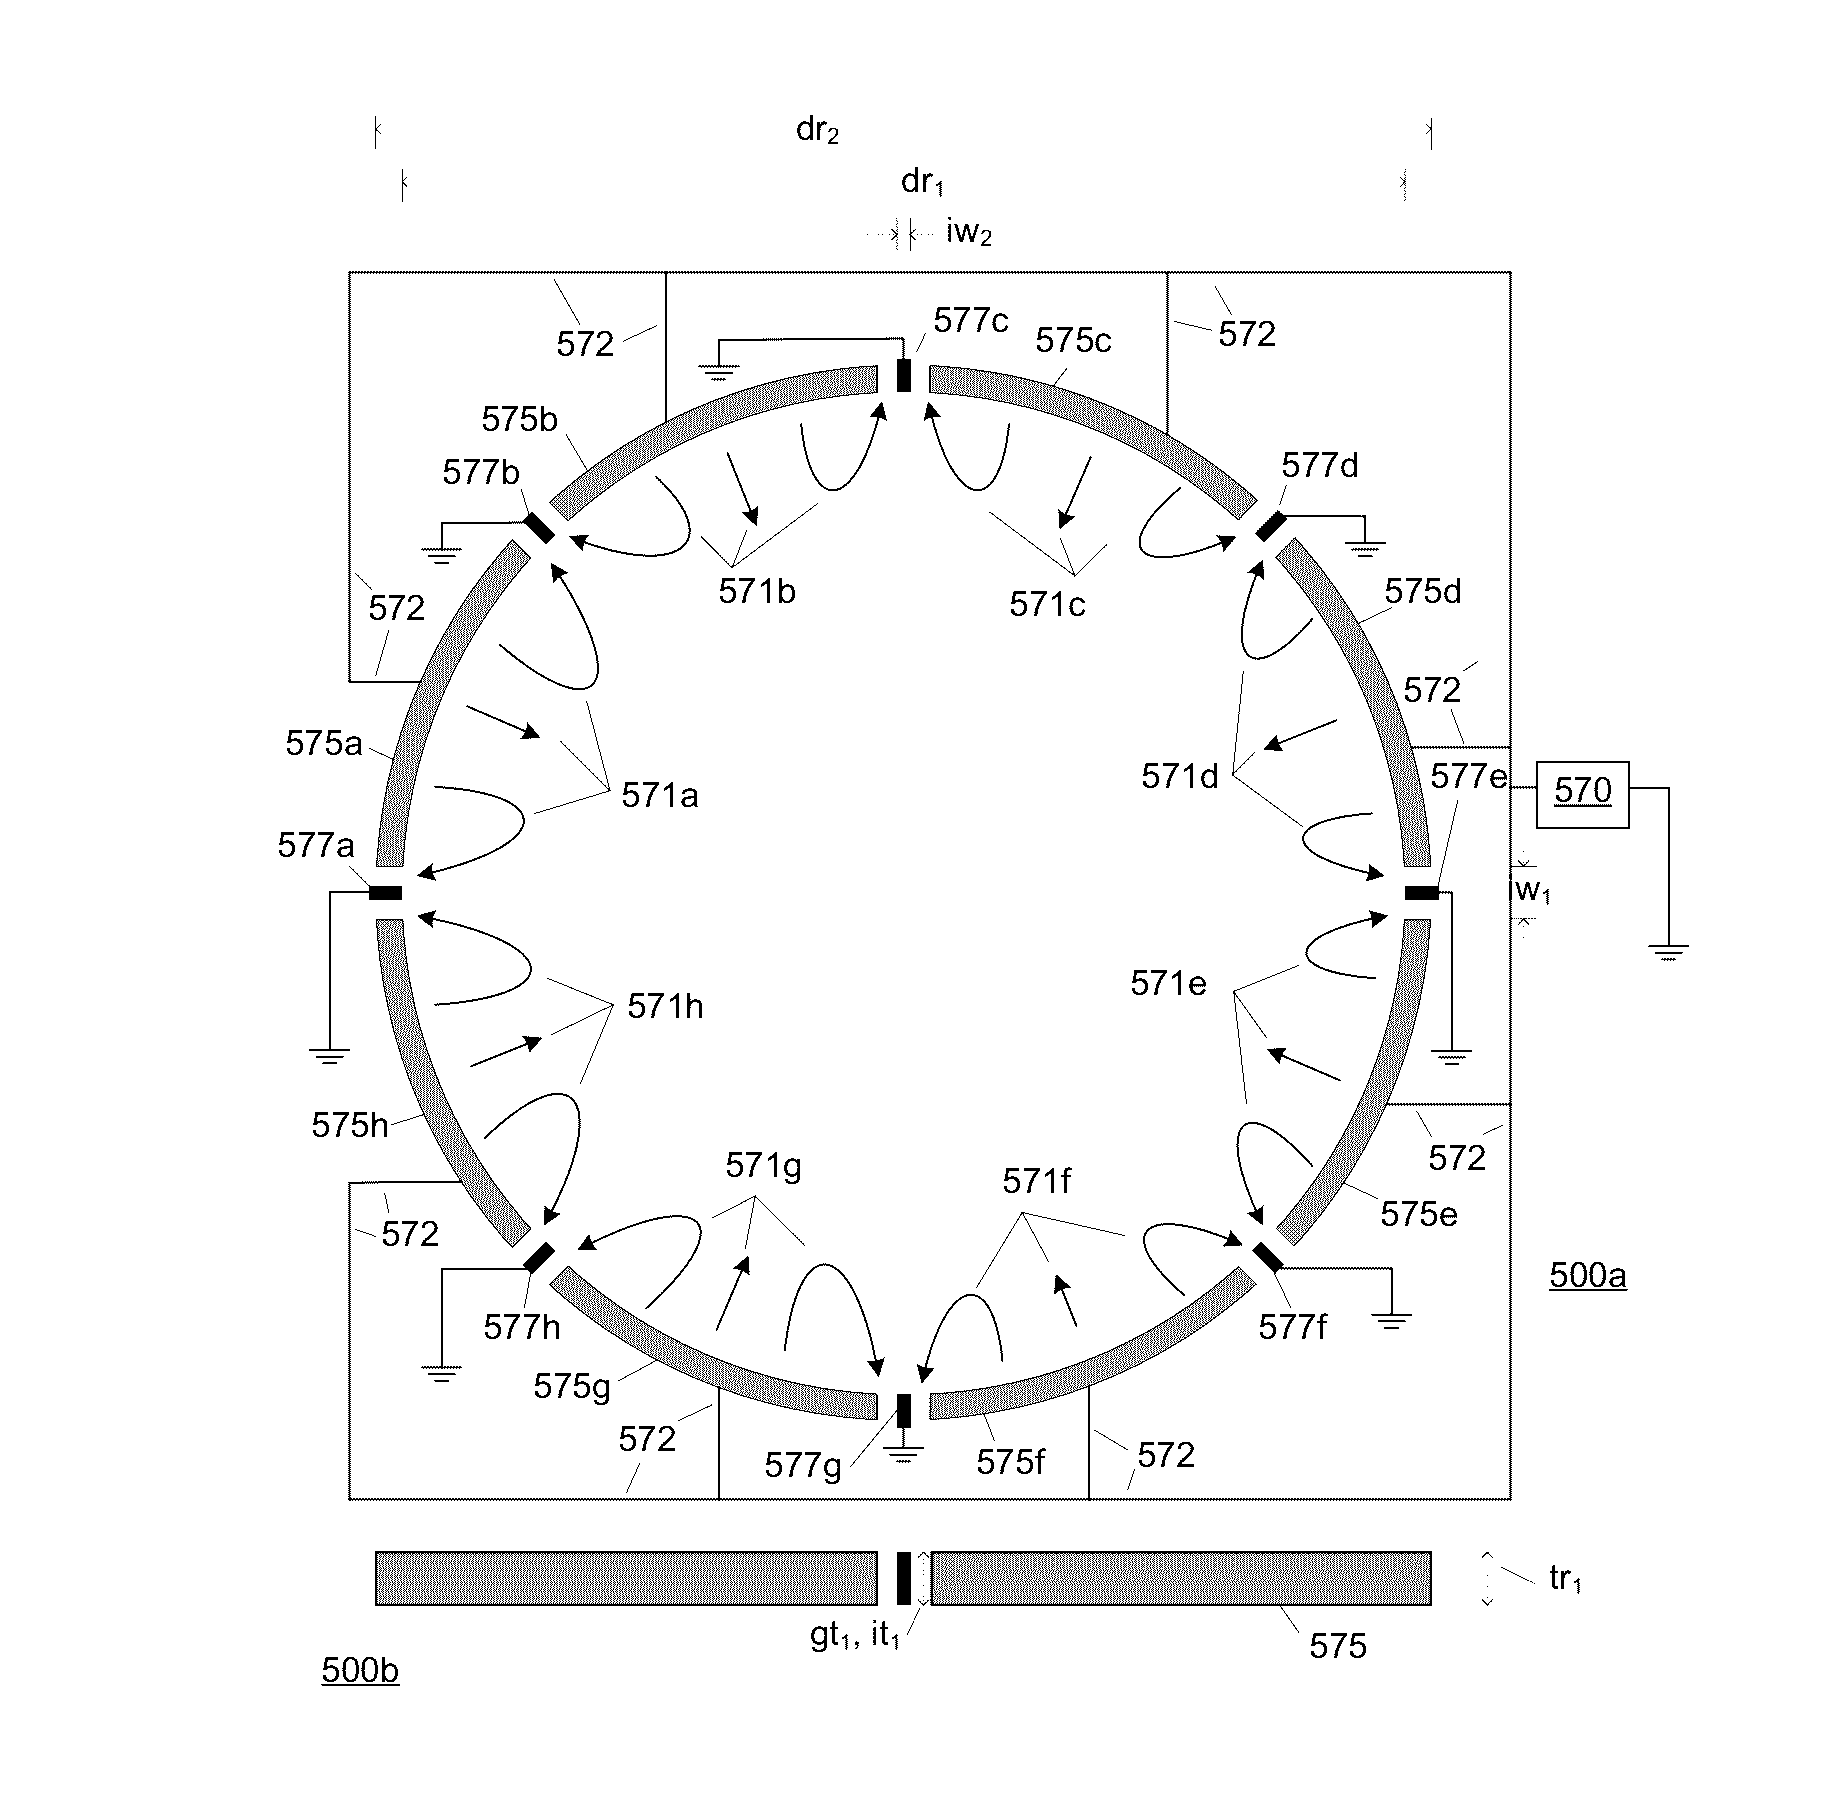 Plasma Generation and Control Using a DC Ring